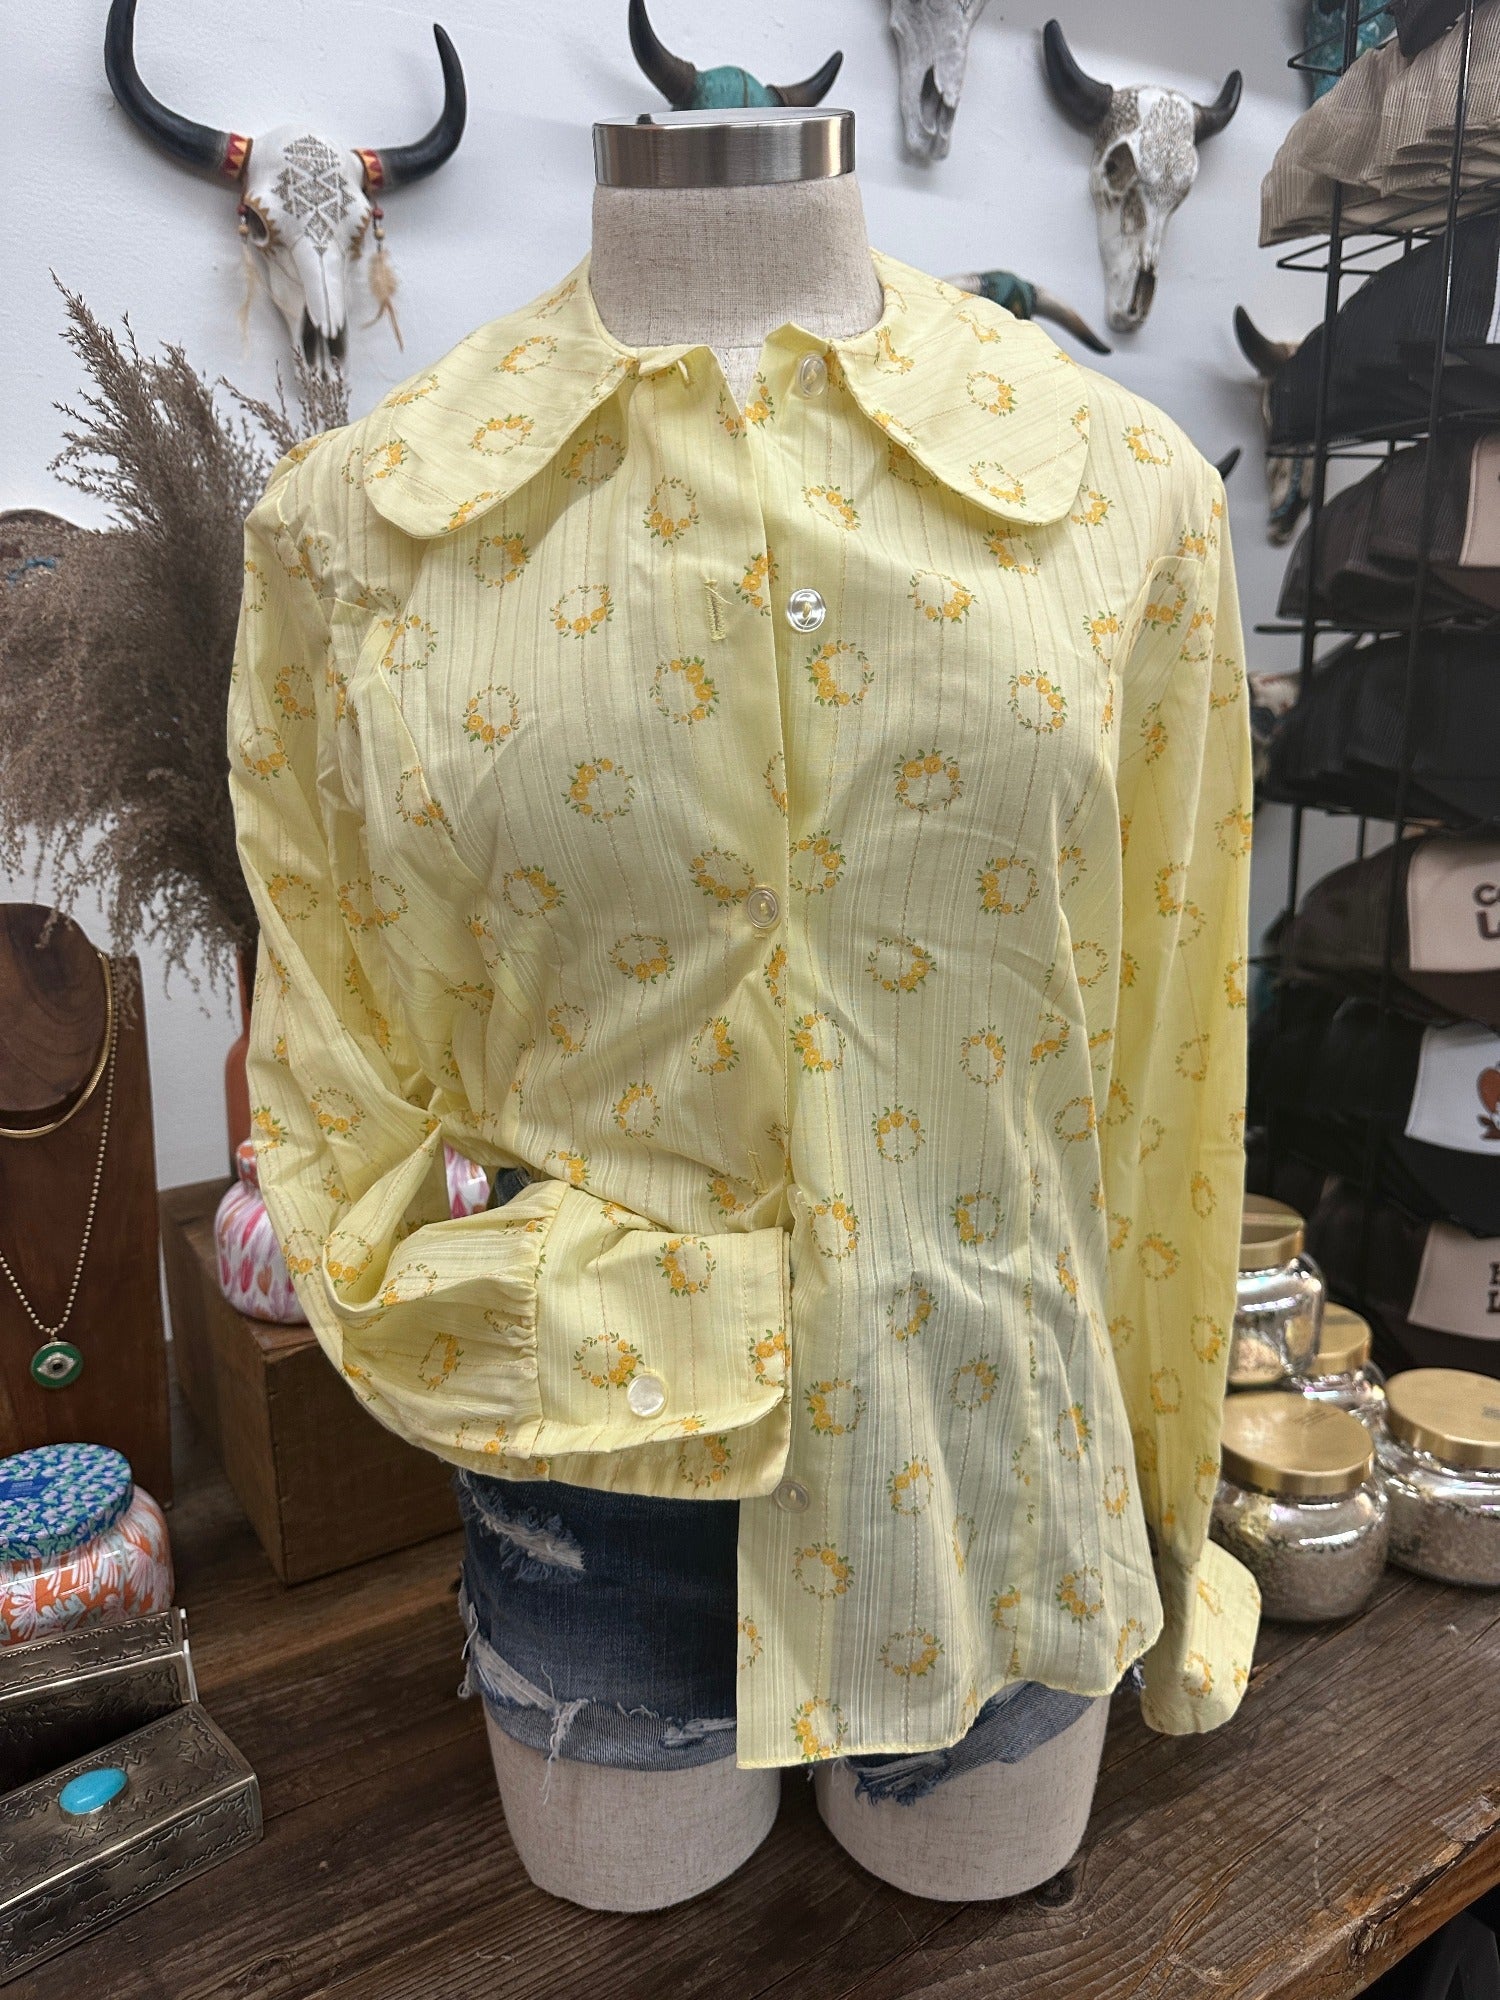 Carol Brent Baby Yellow Floral Wreath Design Vintage Button Up Blouse